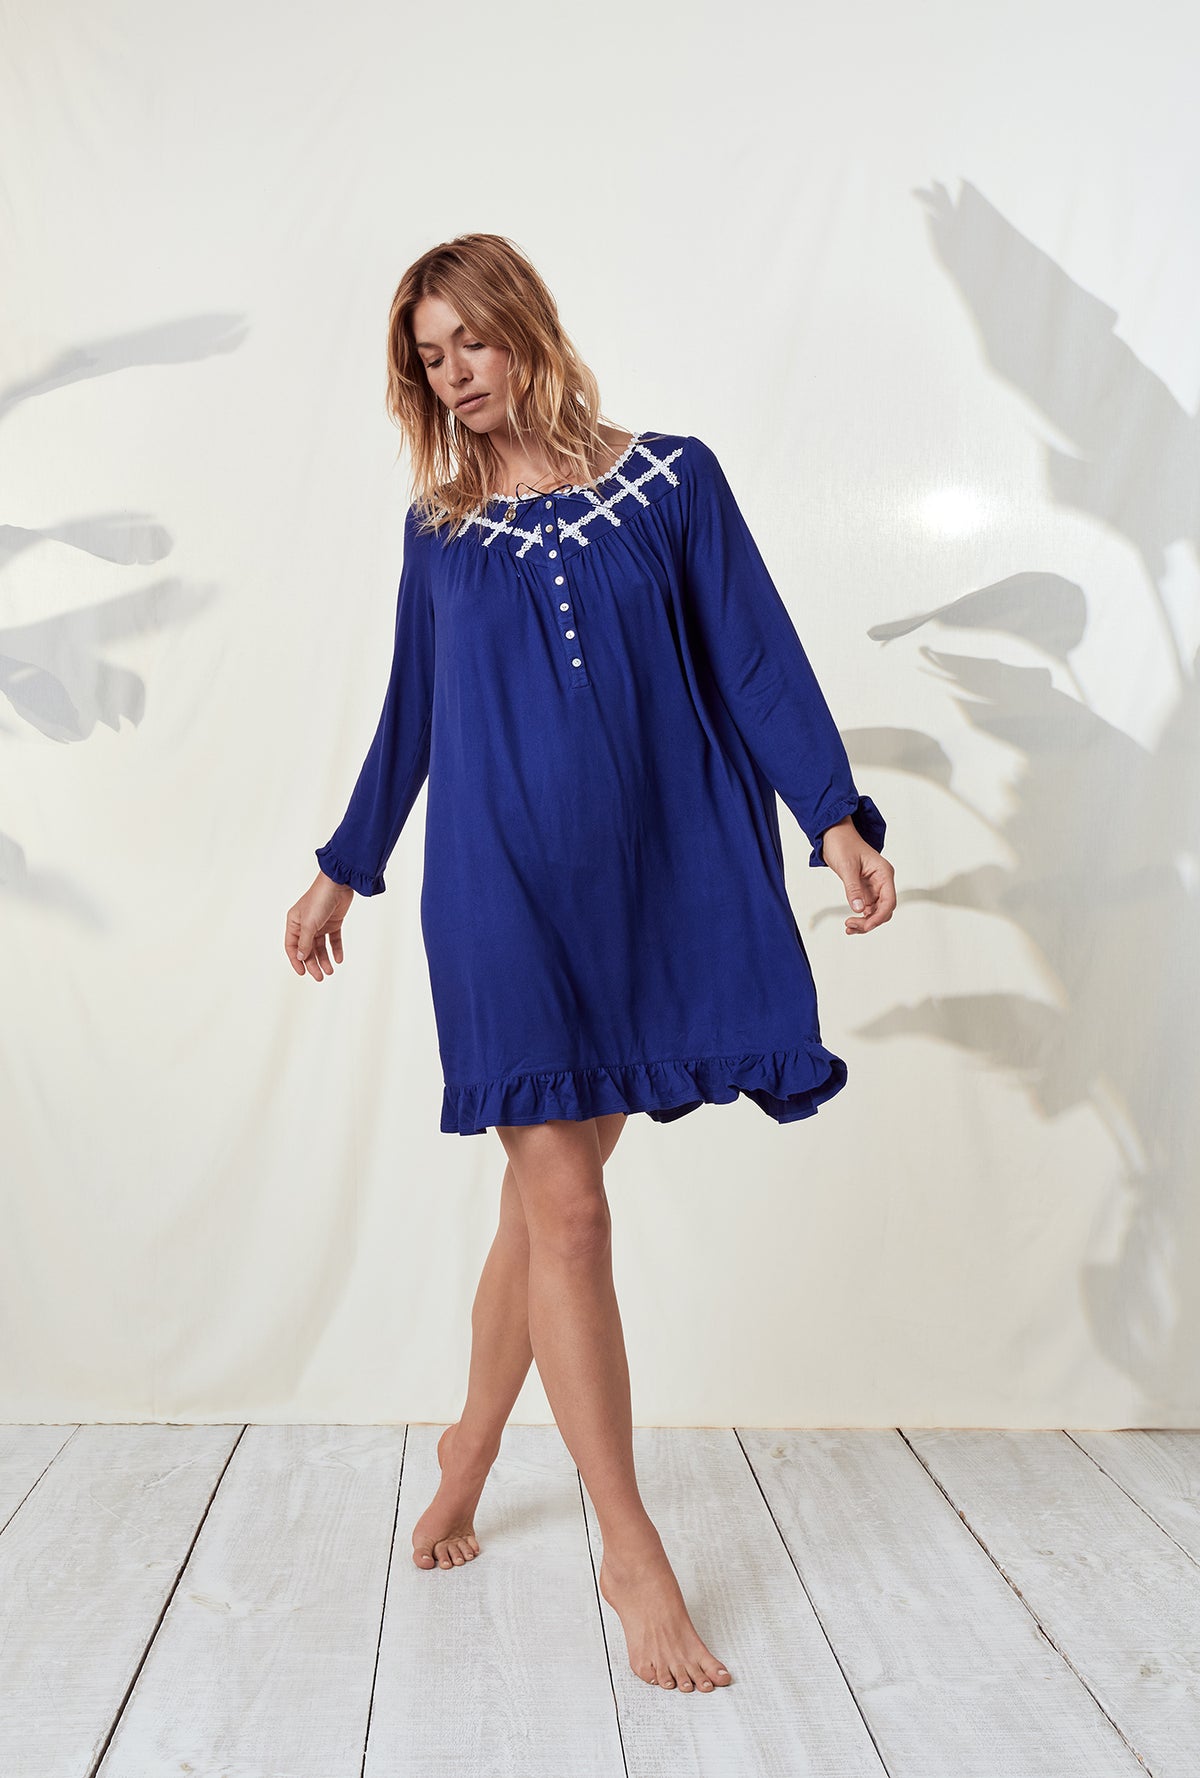 A lady wearing a dream sweater indigo long sleeve knit short nightgown.